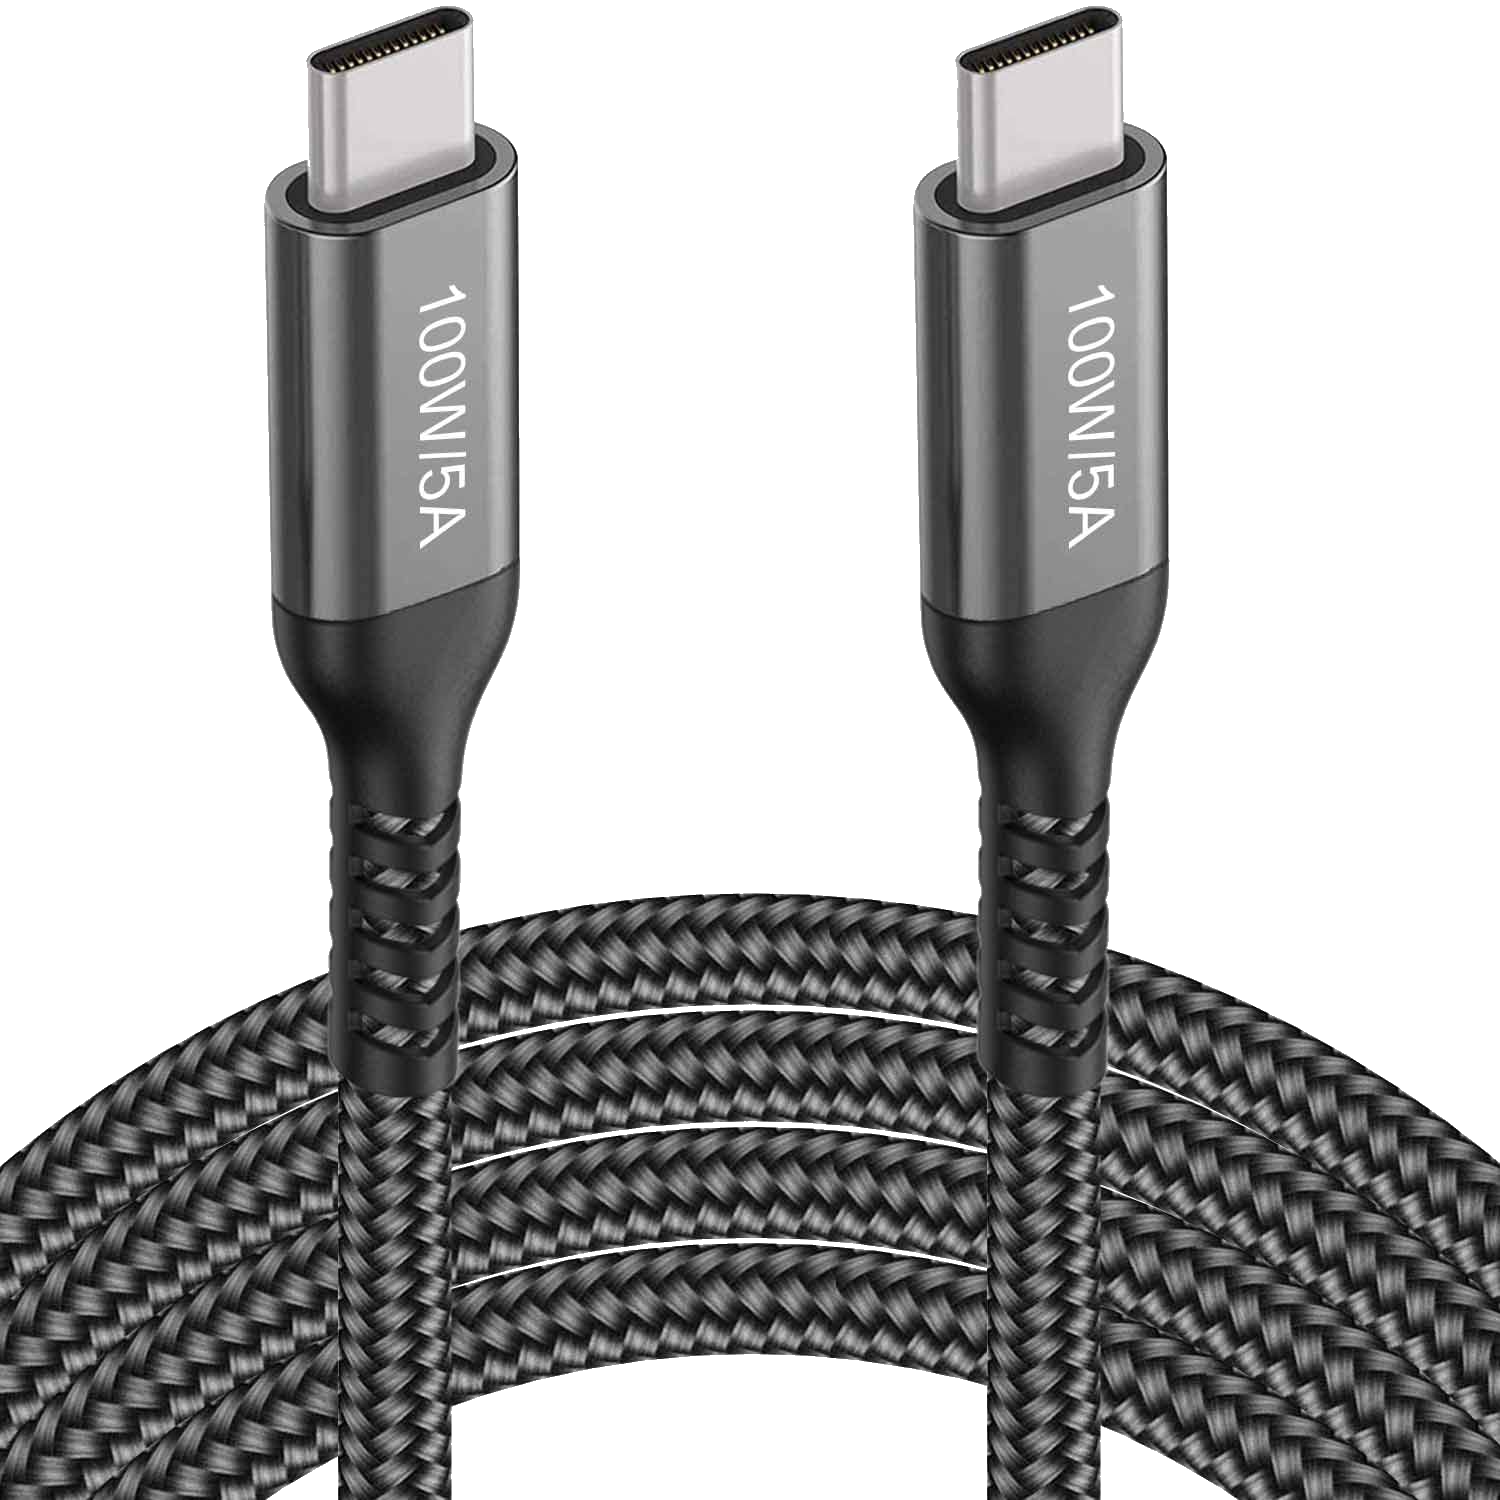 Grtoeud USB-C to USB-C Cable